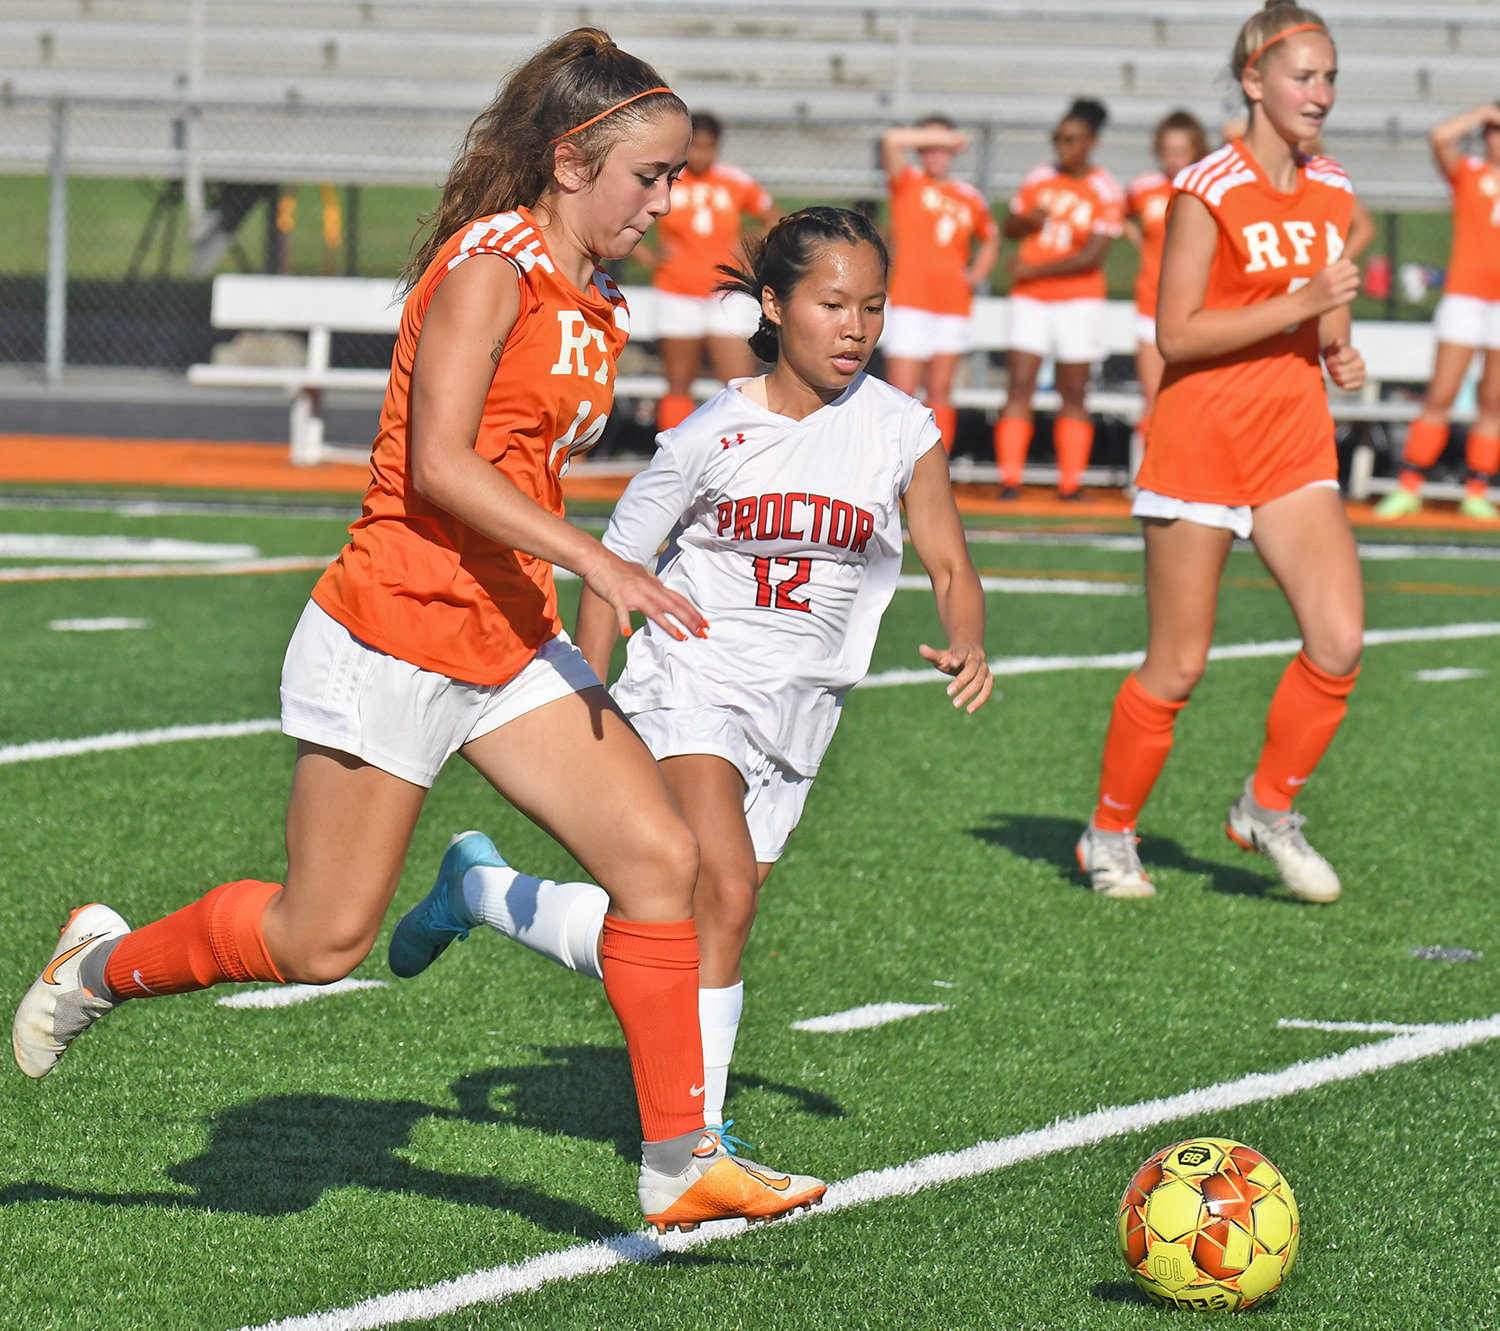 Rome Free Academy's Antonia Schillaci, left, sprints upfield to control the ball while challenged by Proctor's Nancy Shine during the first half of Thursday night's game at RFA Stadium. The Black Knights won 10-0 and Schillaci had two assists.